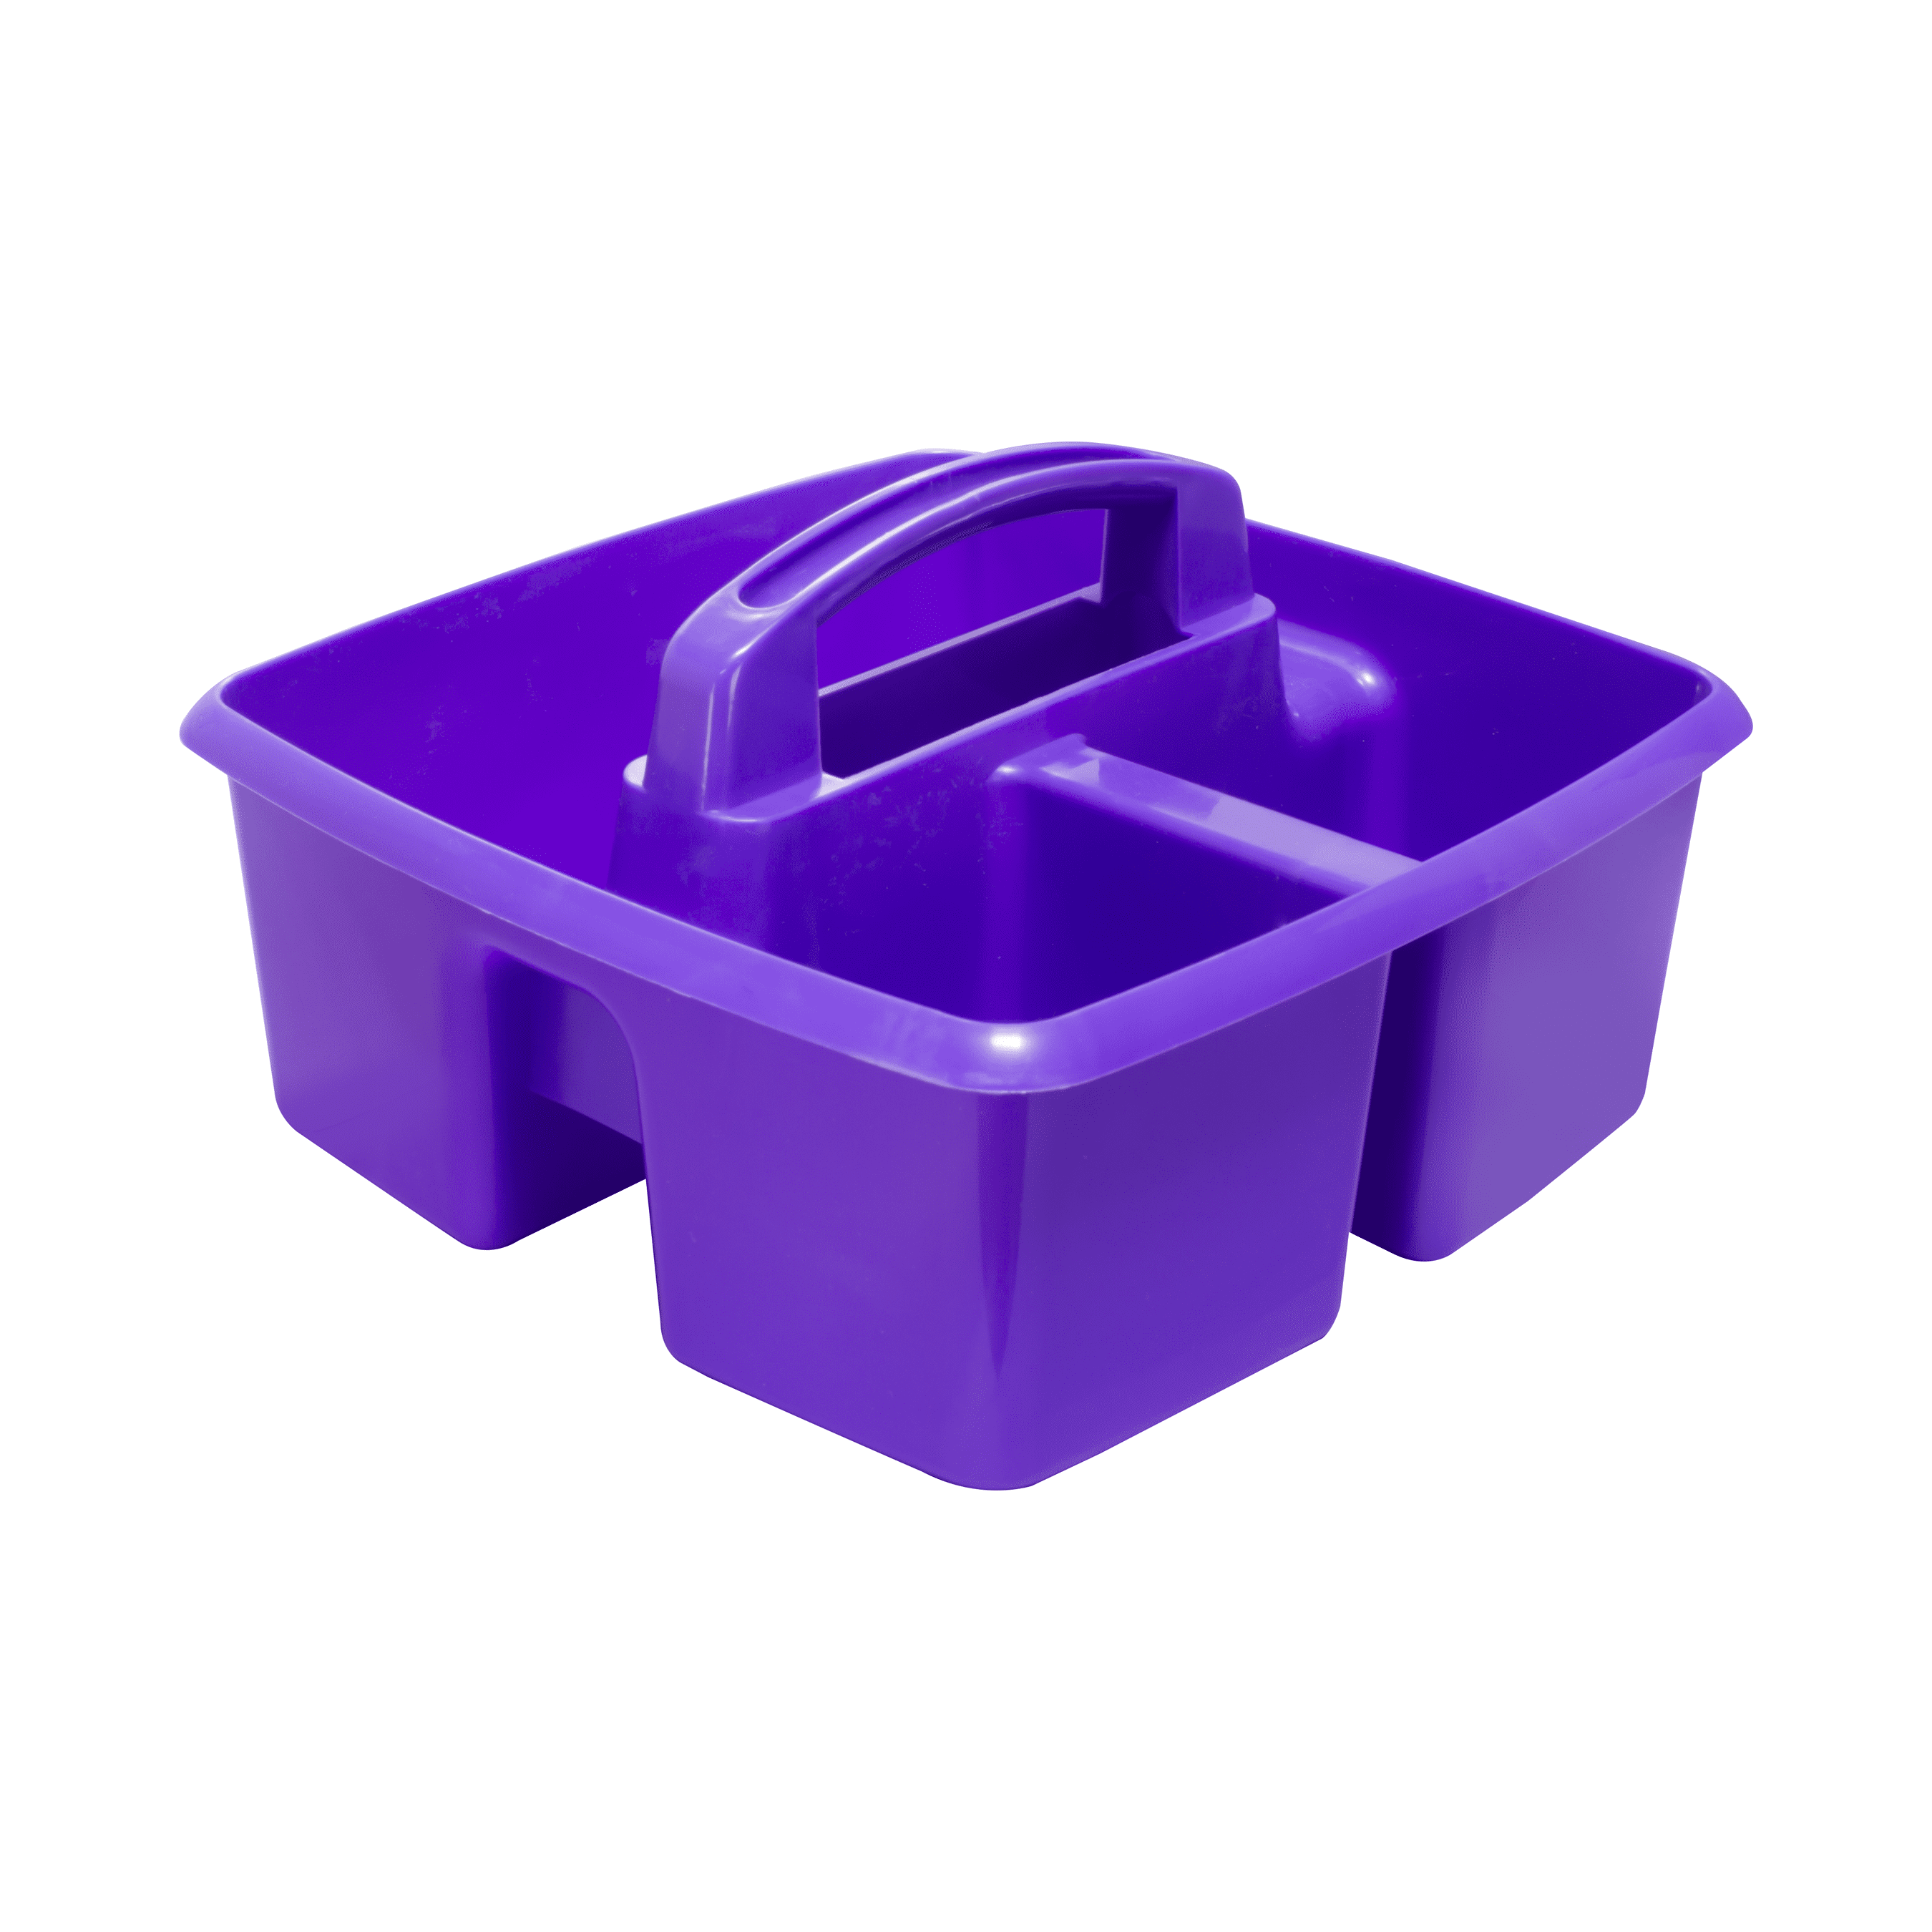  Caddy Organizer l Stackable Plastic Caddy with Handle, Desk,  Makeup, Dorm Caddy, Classroom and Craft Organizers and Storage Box Tote